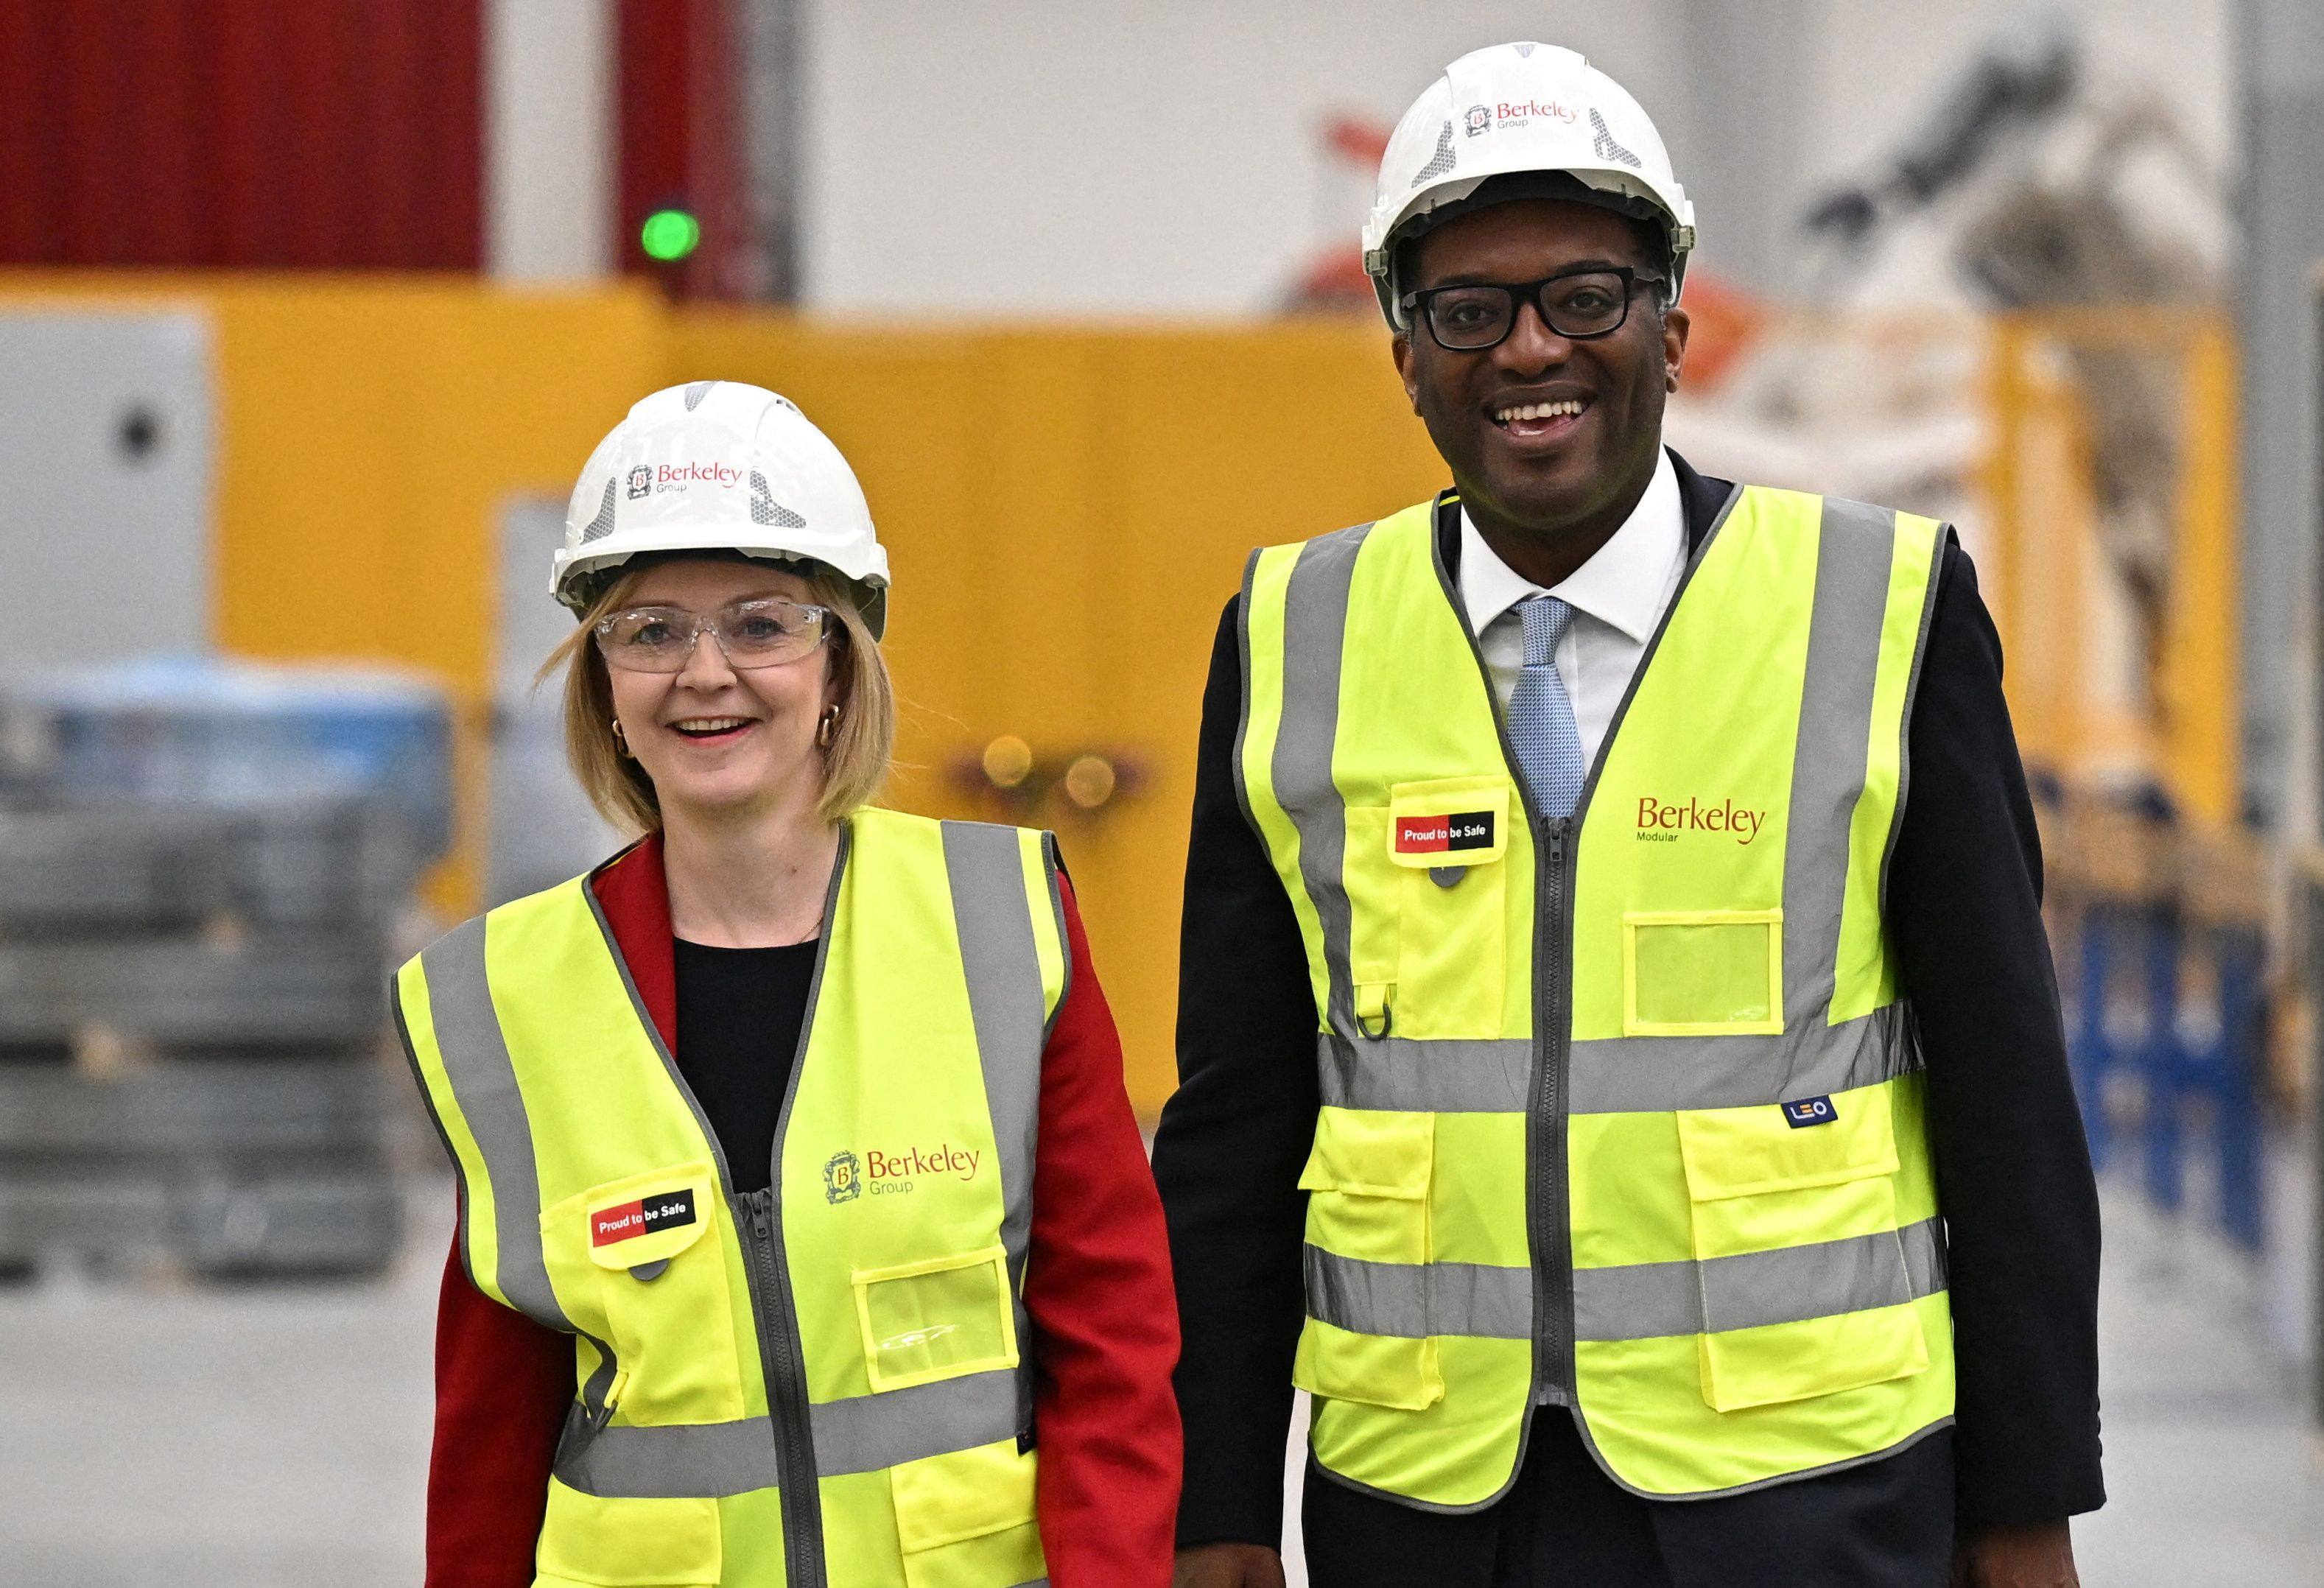 British Prime Minister Liz Truss (left) and Chancellor of the Exchequer Kwasi Kwarteng smile for the cameras during a visit to Berkeley Modular in Northfleet, England, on September 23. Photo: AFP